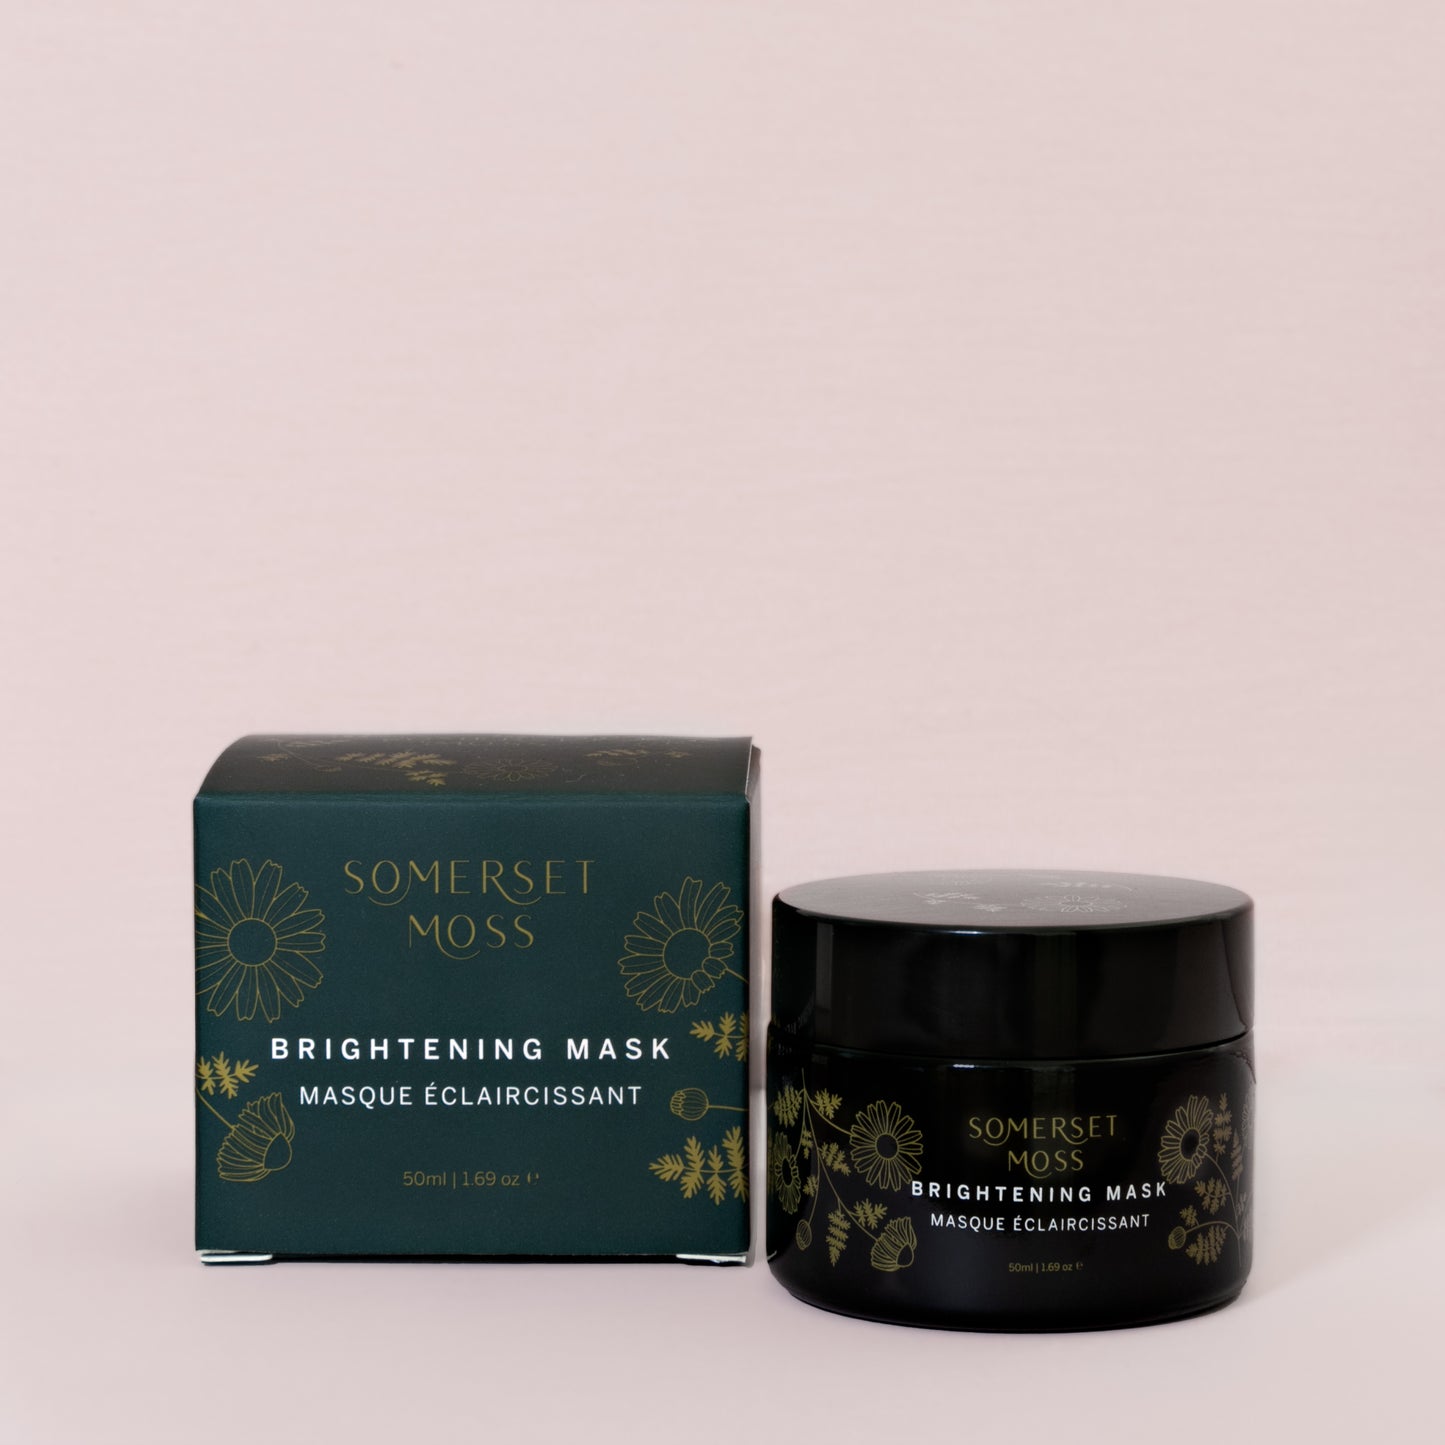 Somerset Moss Brightening Mask with Box